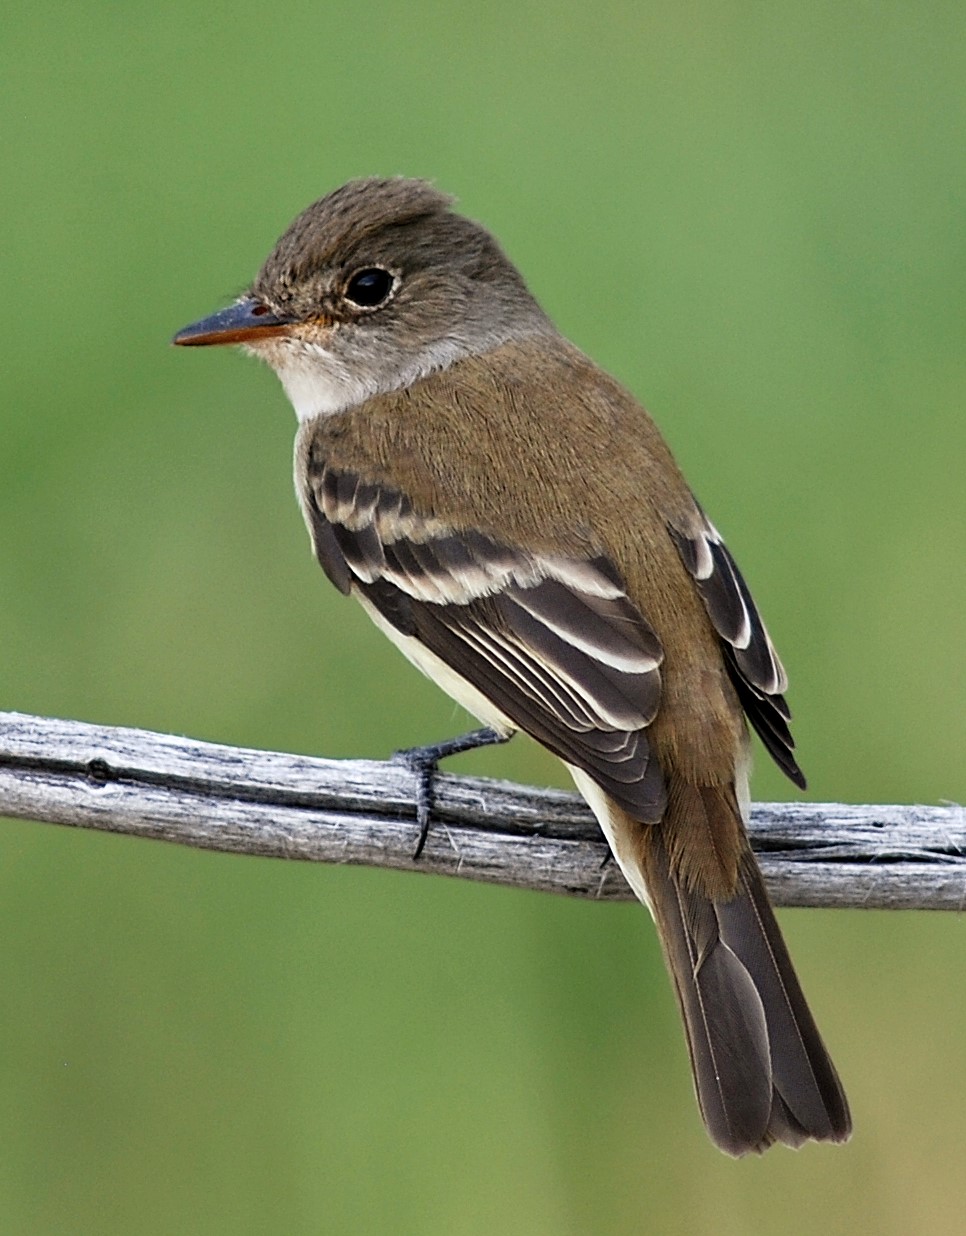 <i/>Southwestern Willow Flycatcher</i><br>
<small> By: Rick Fridell</small>
